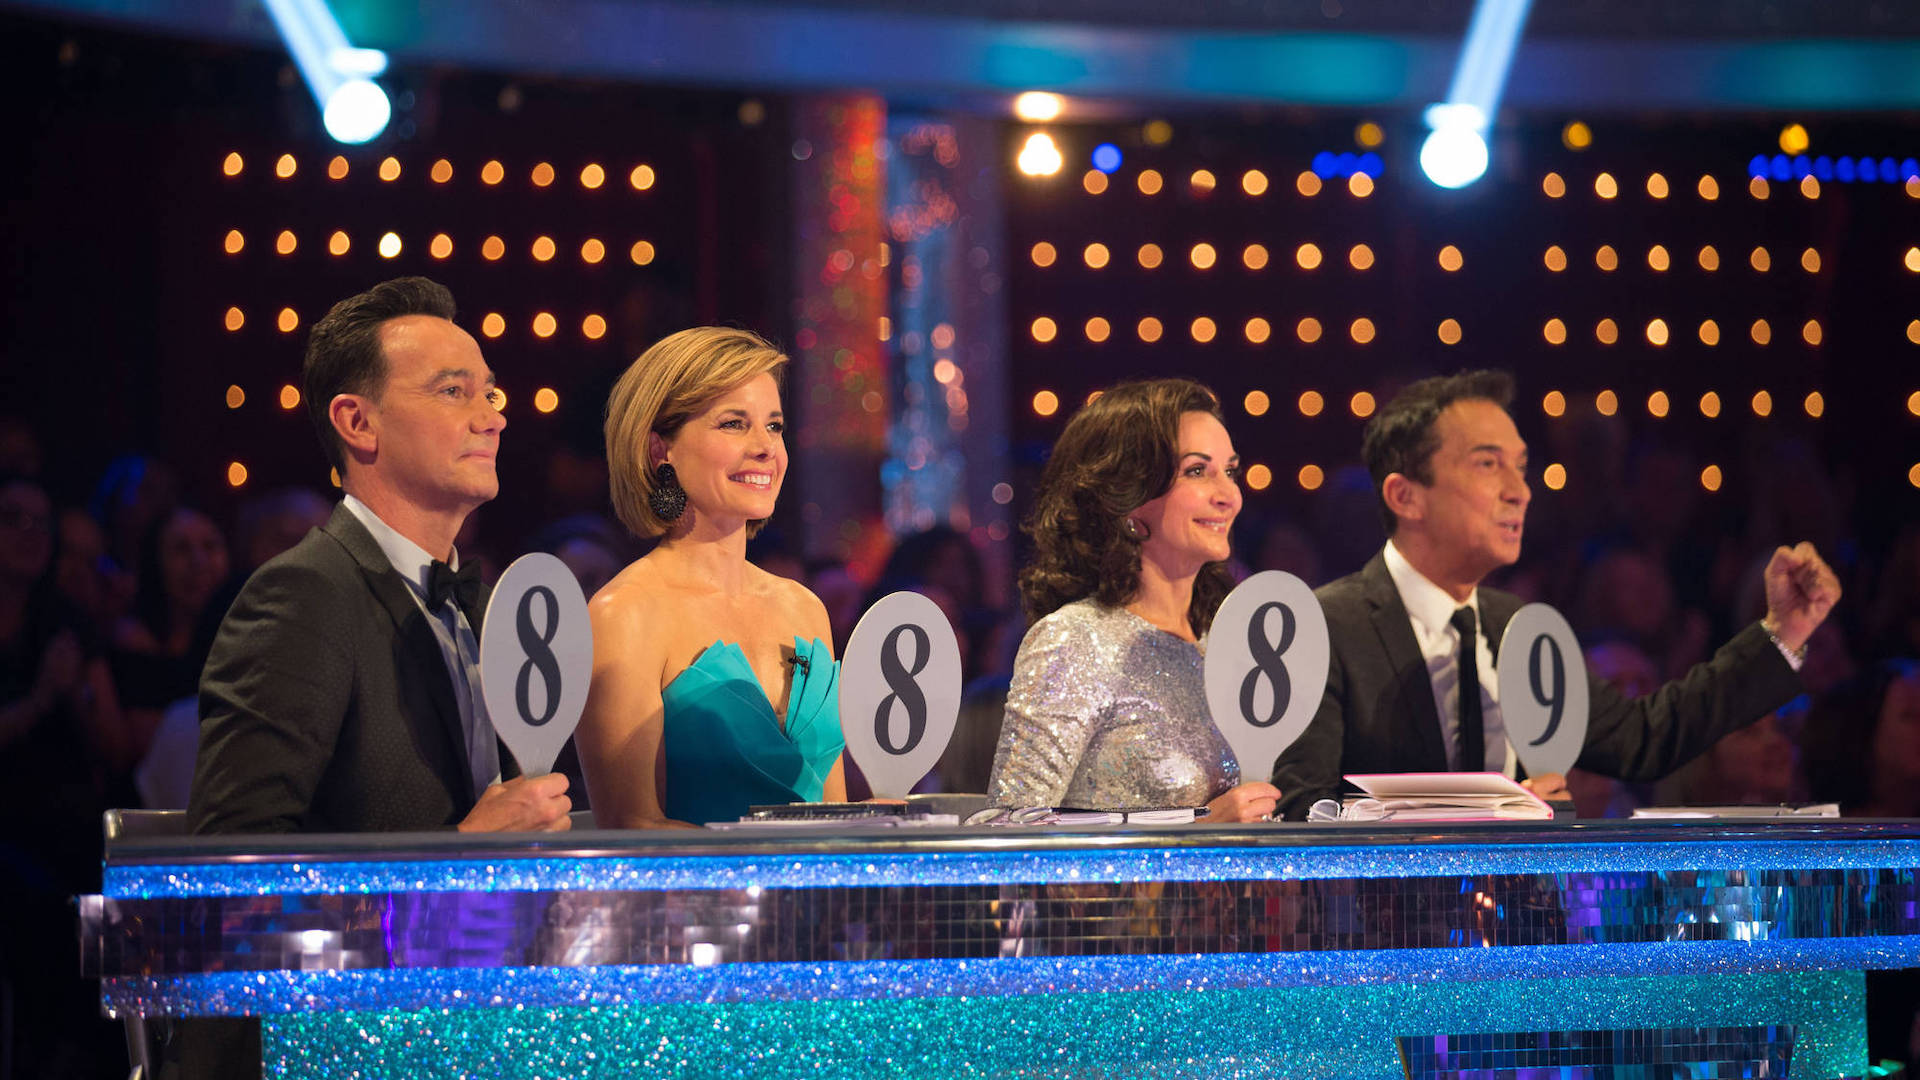 The Strictly Come Dancing judges